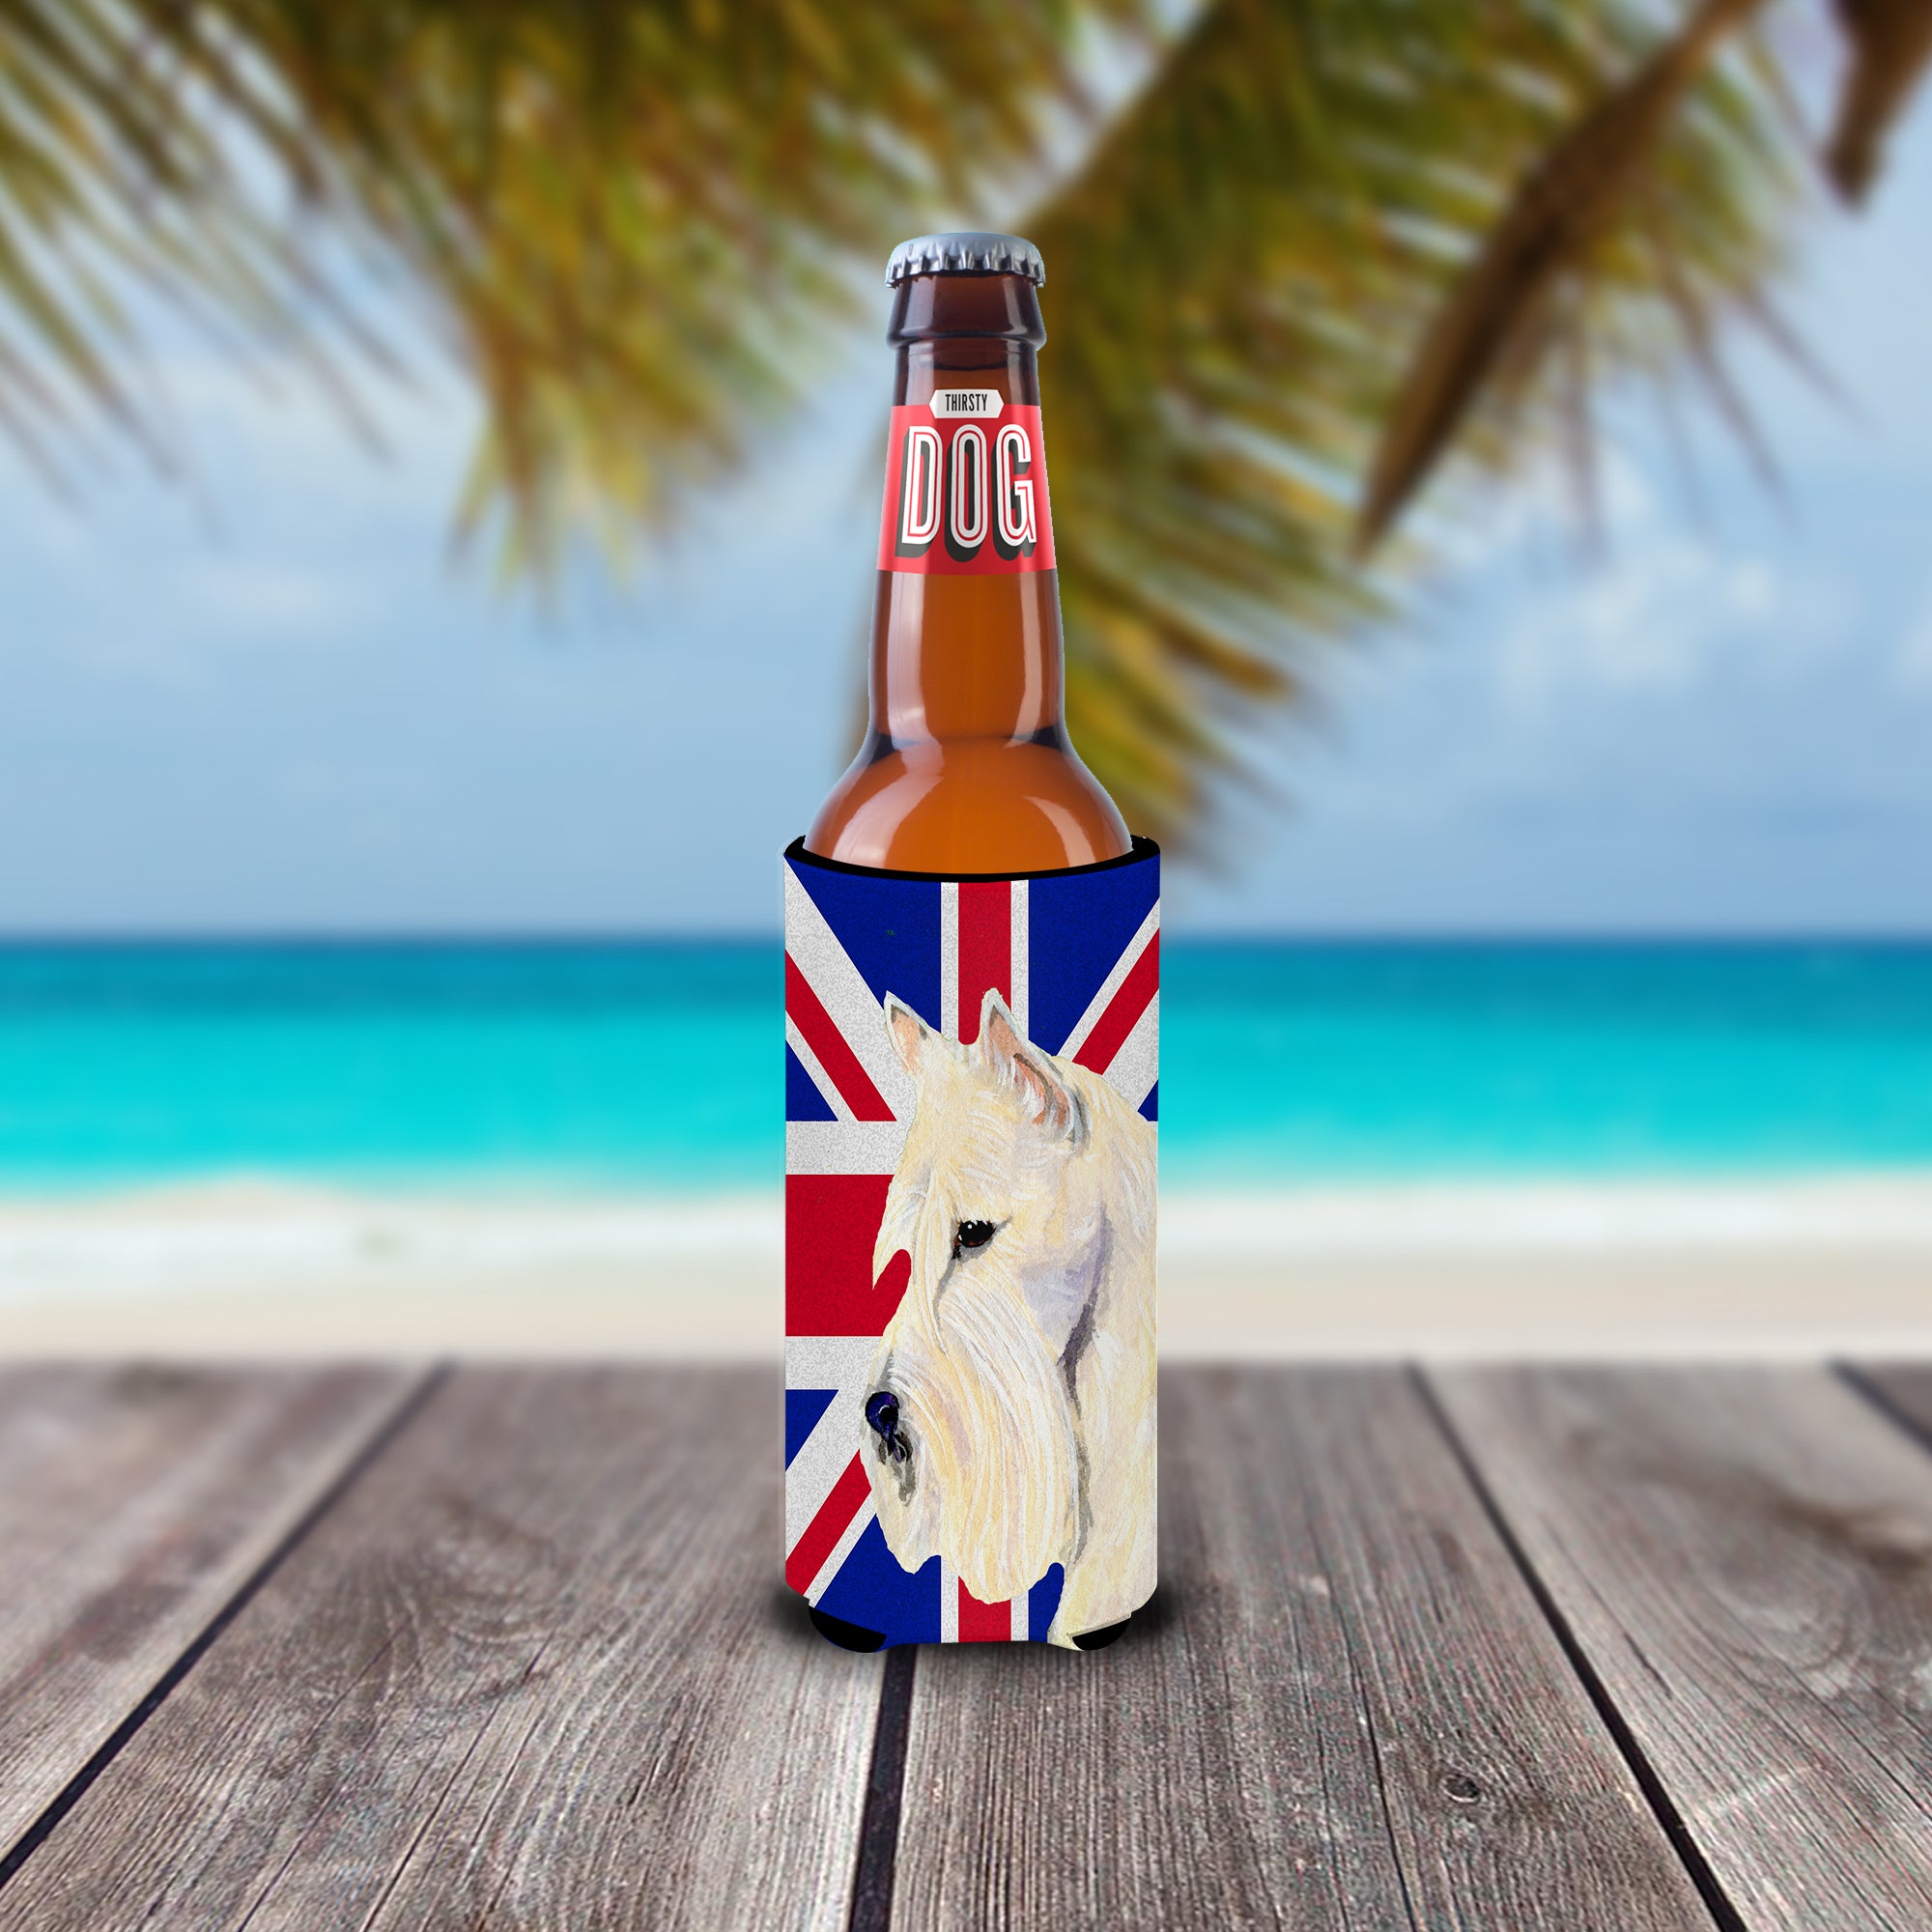 Scottish Terrier Wheaten with English Union Jack British Flag Ultra Beverage Insulators for slim cans SS4972MUK